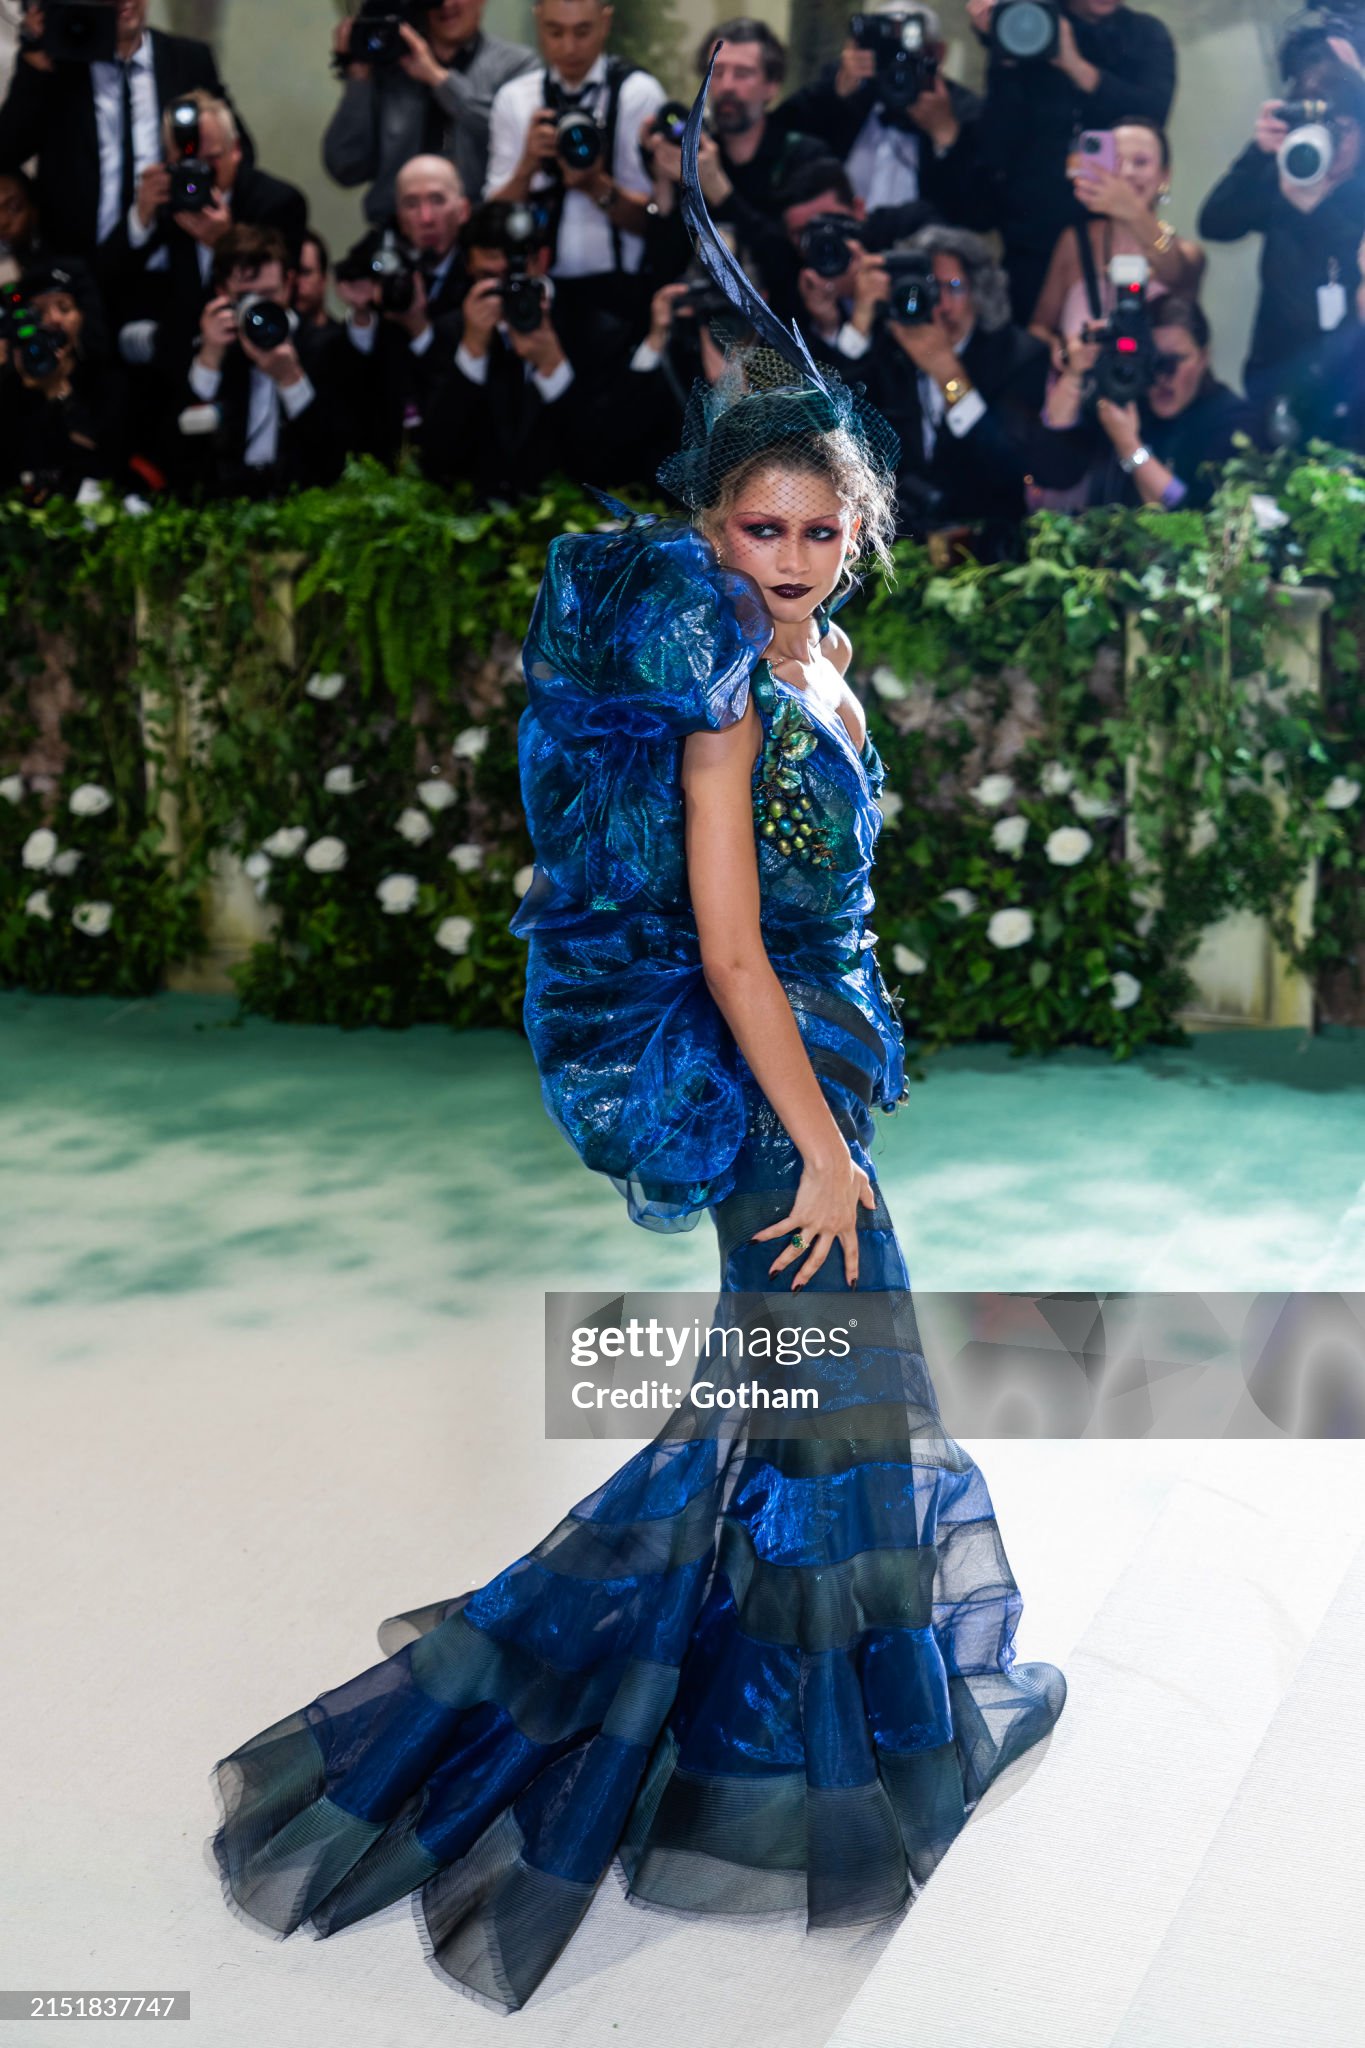 gettyimages-2151837747-2048x2048.jpg